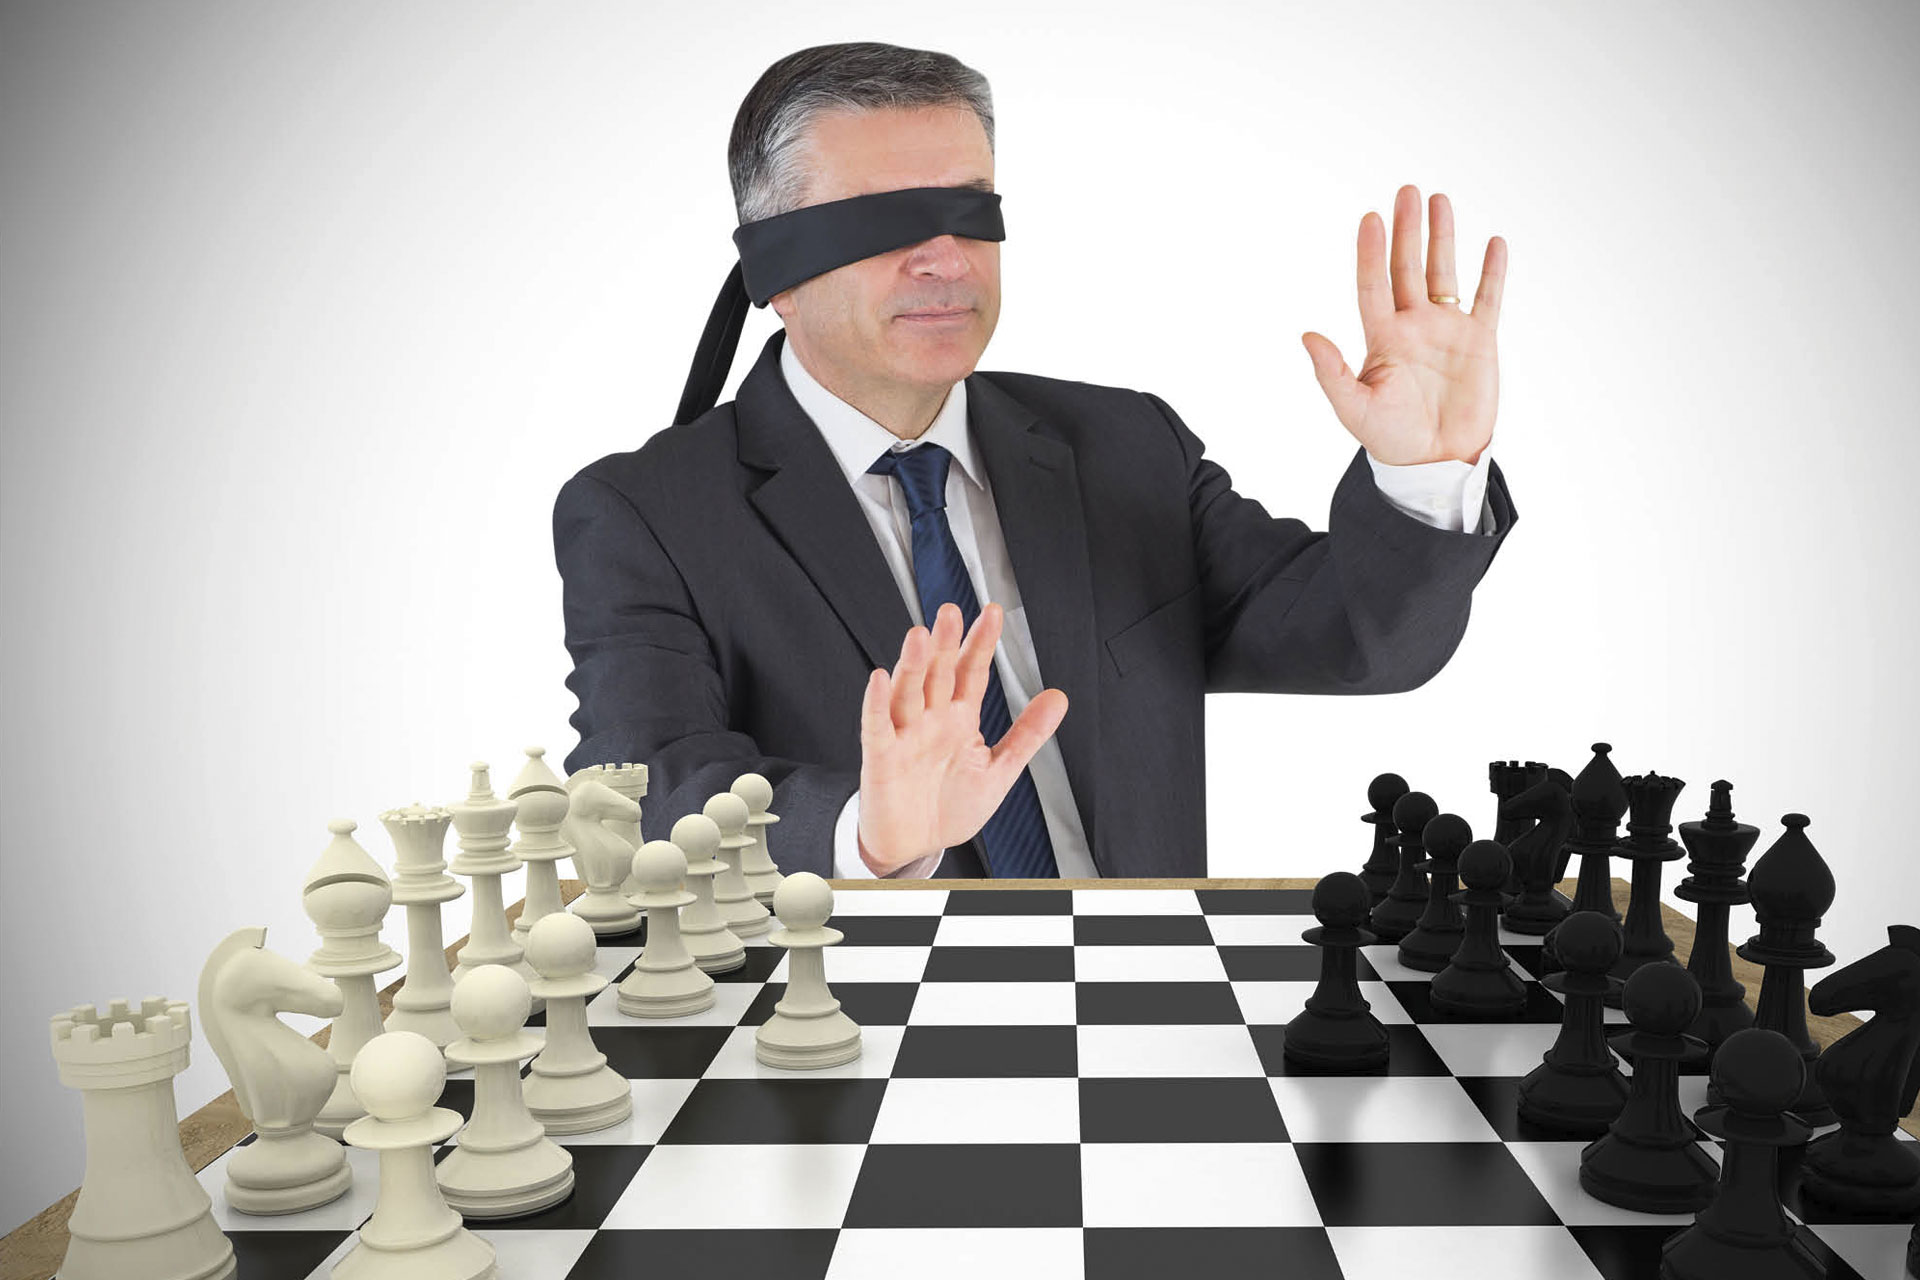 Can you play blindfold chess?